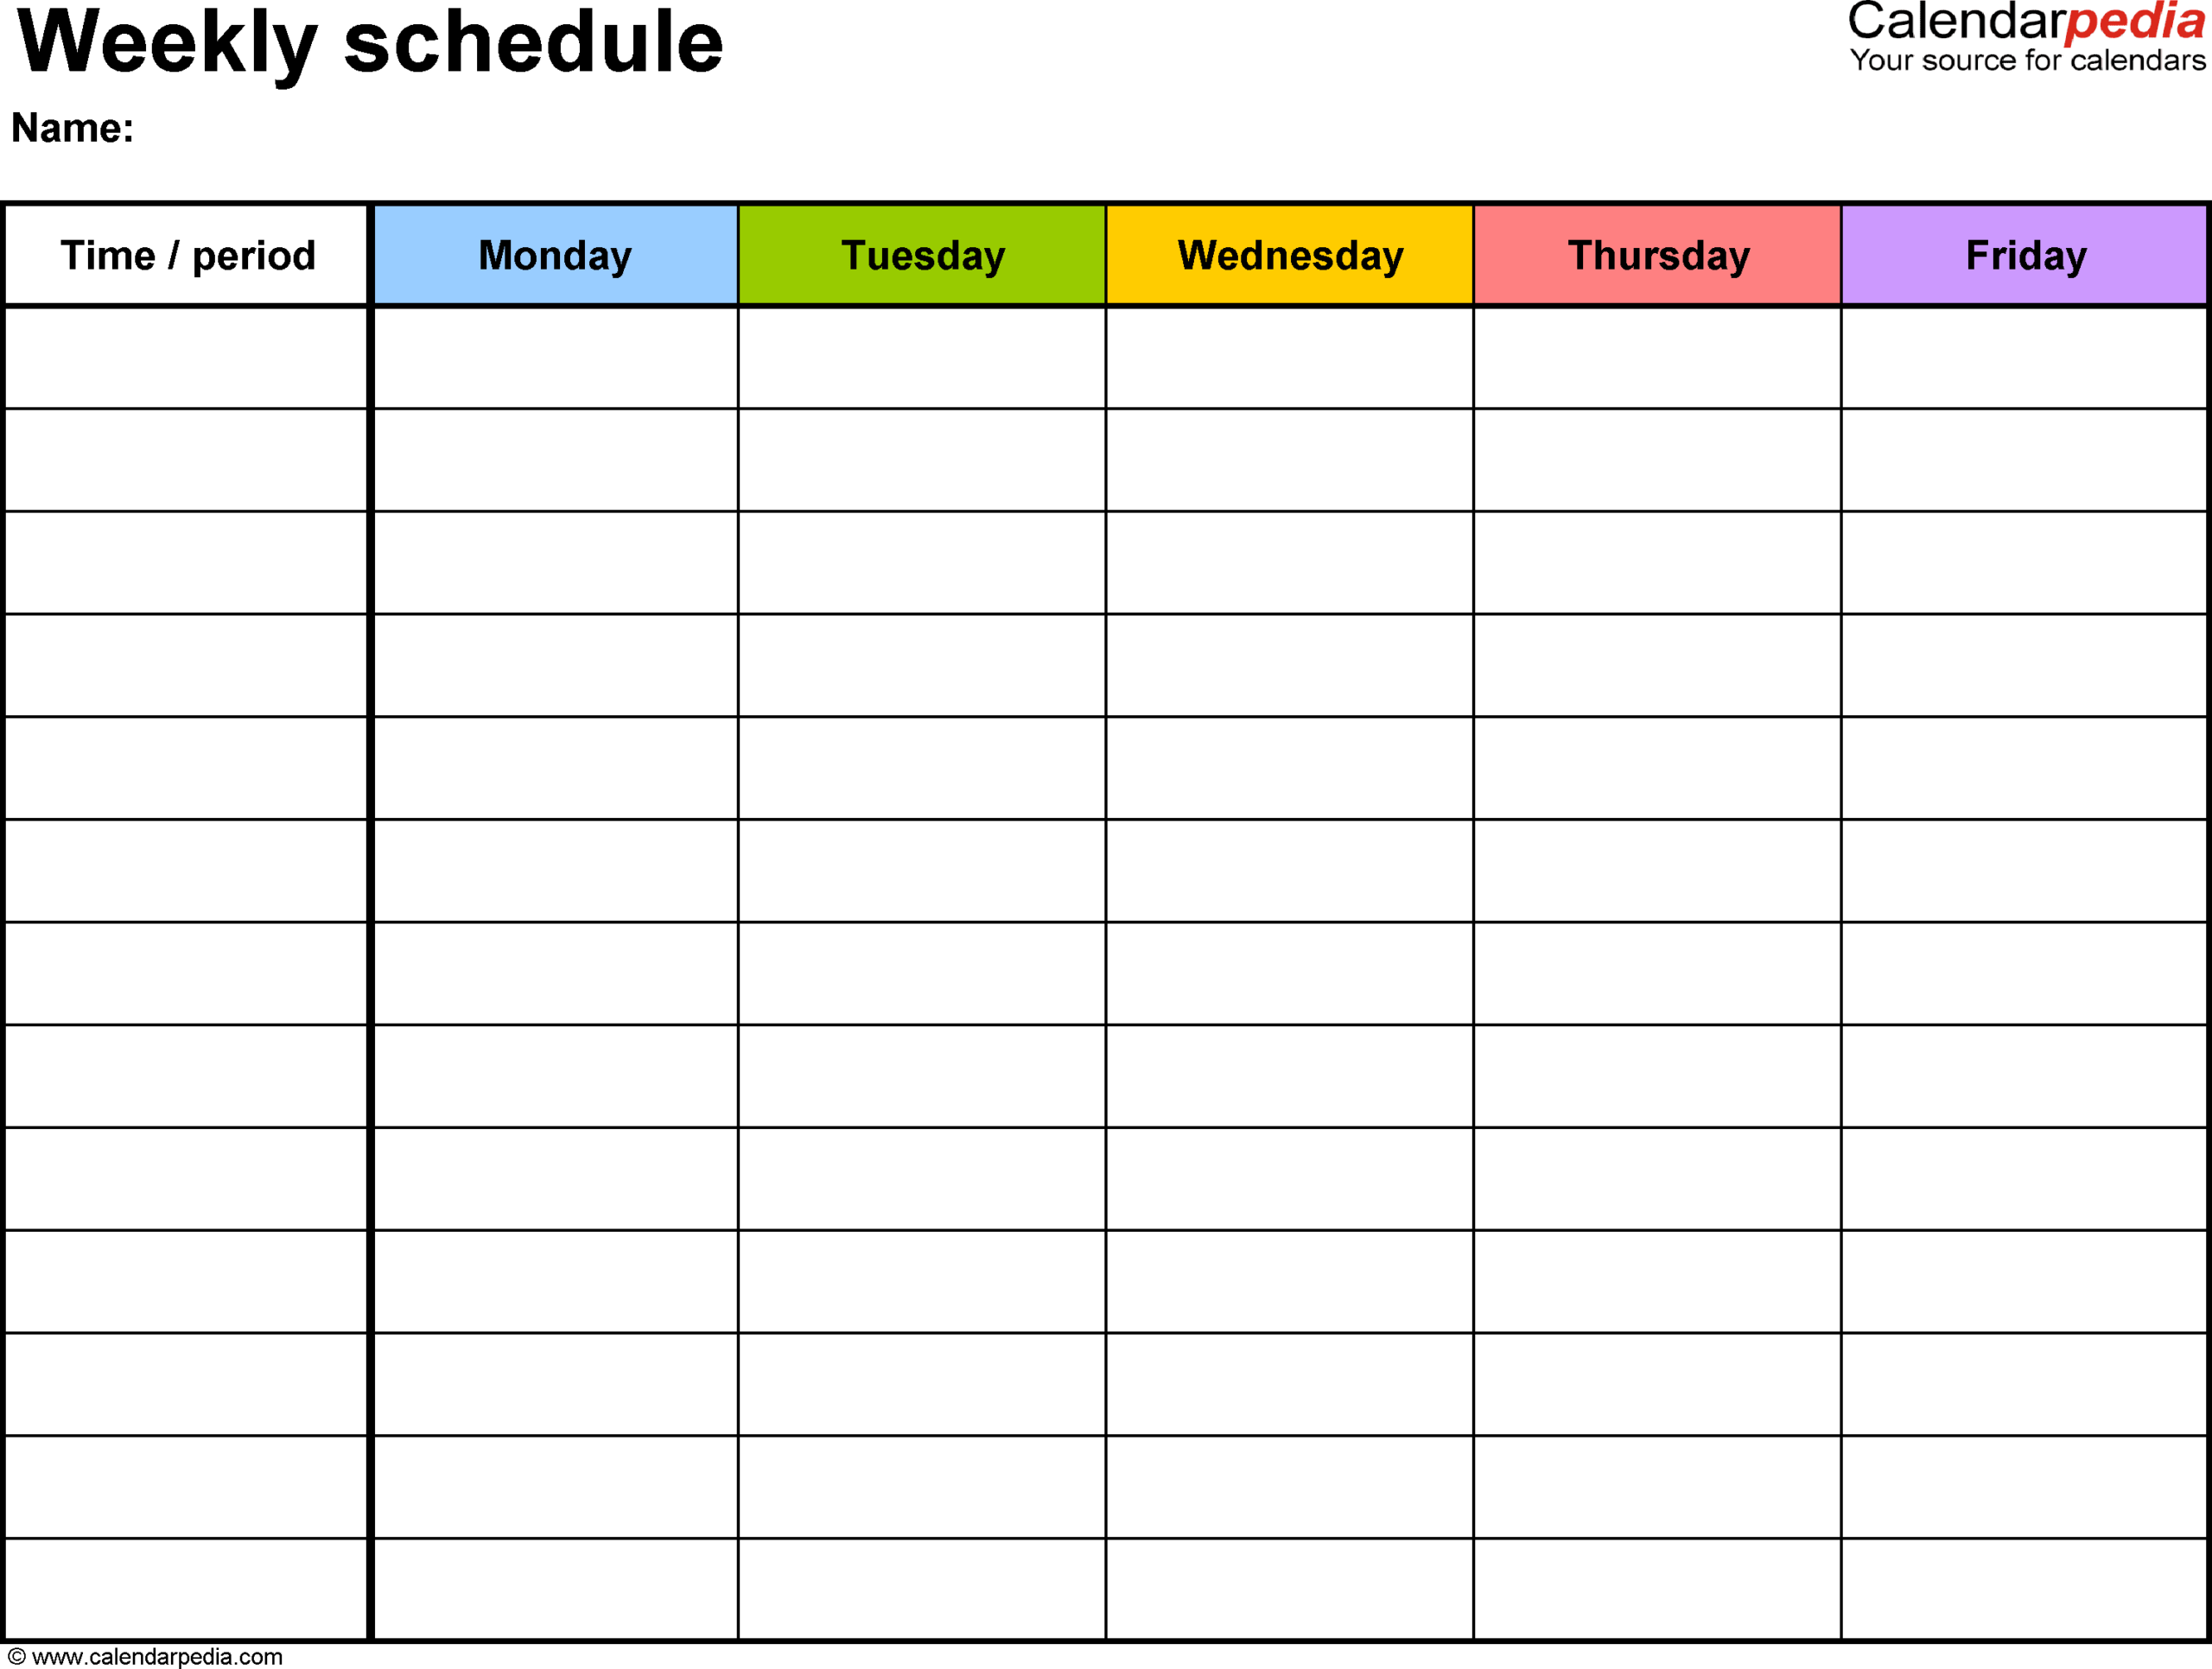 Weekly Schedule Template For Word Version 1: Landscape 1